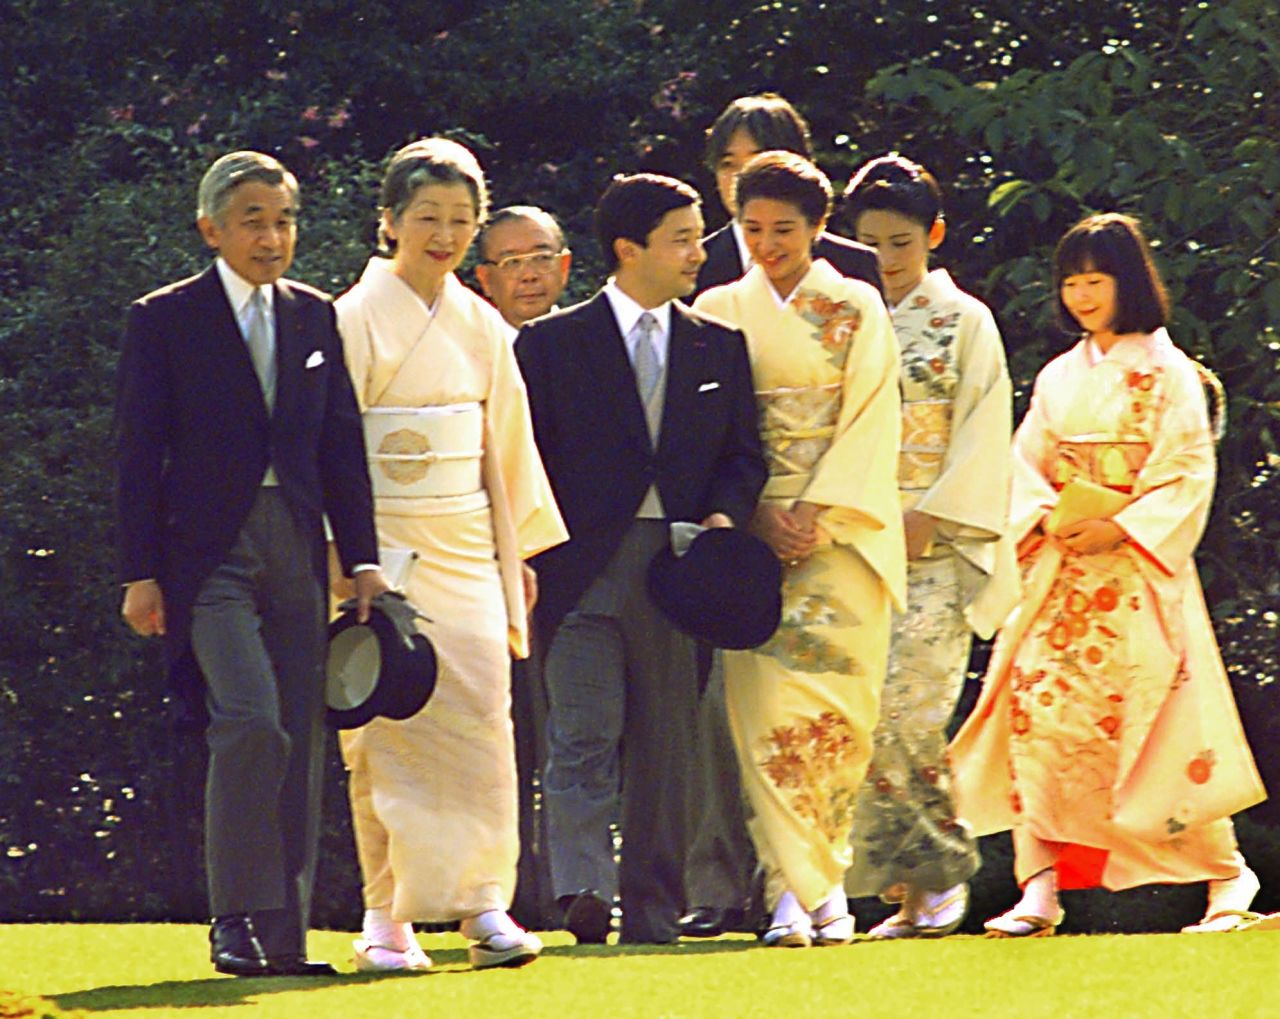 Emperor Akihito and Empress Michiko, left, lead their children and their spouses during a garden party in Tokyo in 1997.